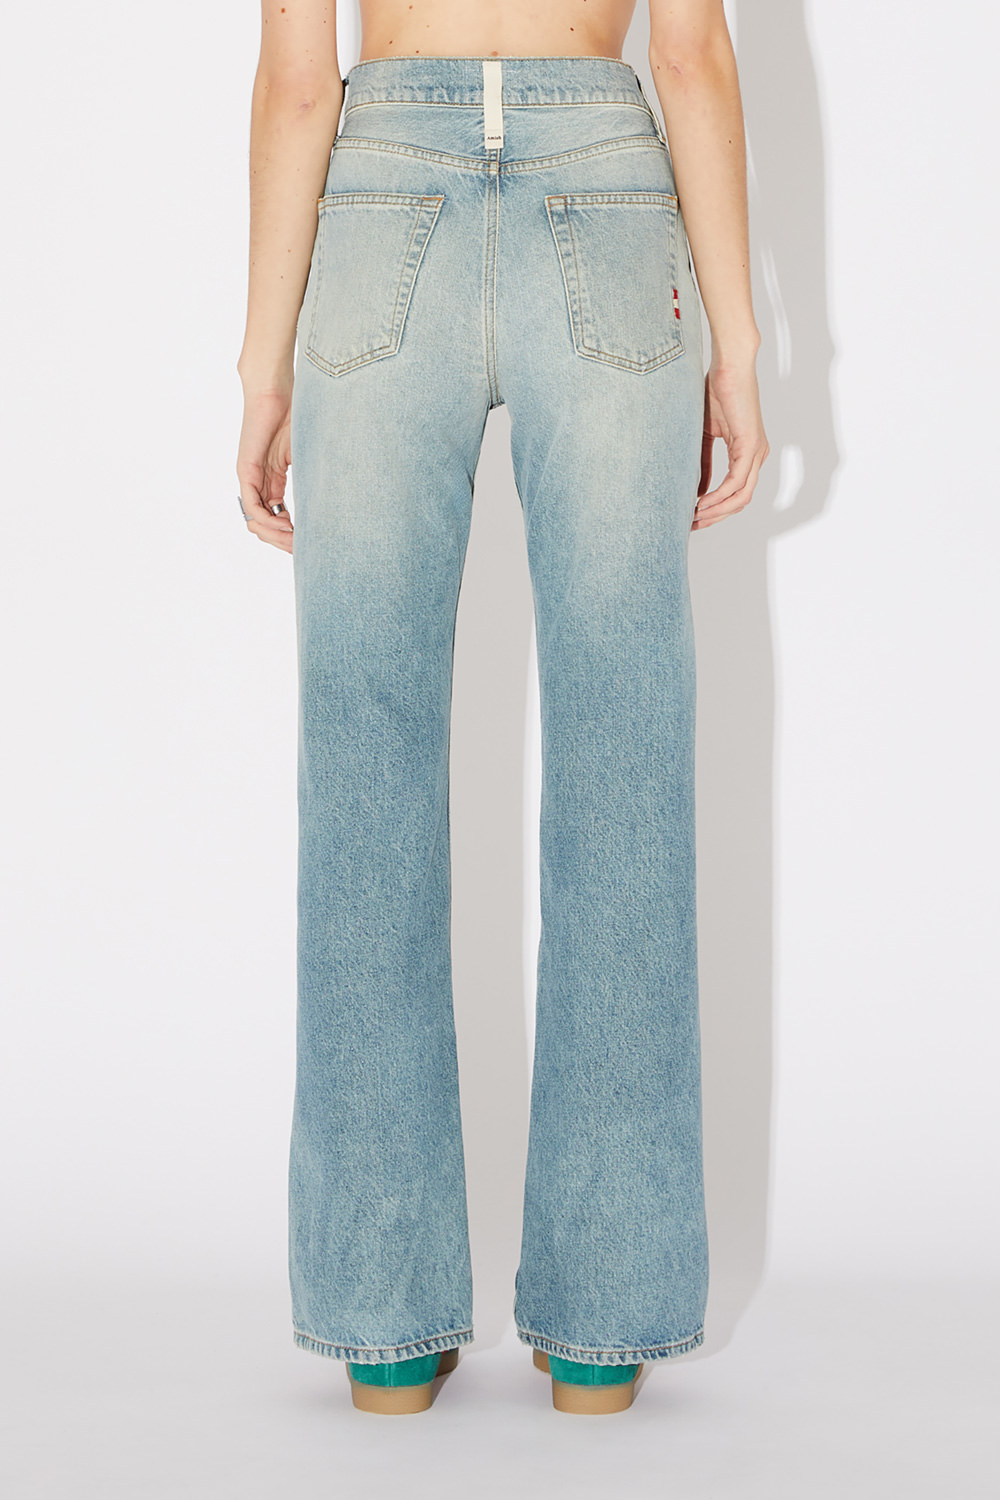 AMISH: REAL VINTAGE KENDALL JEANS